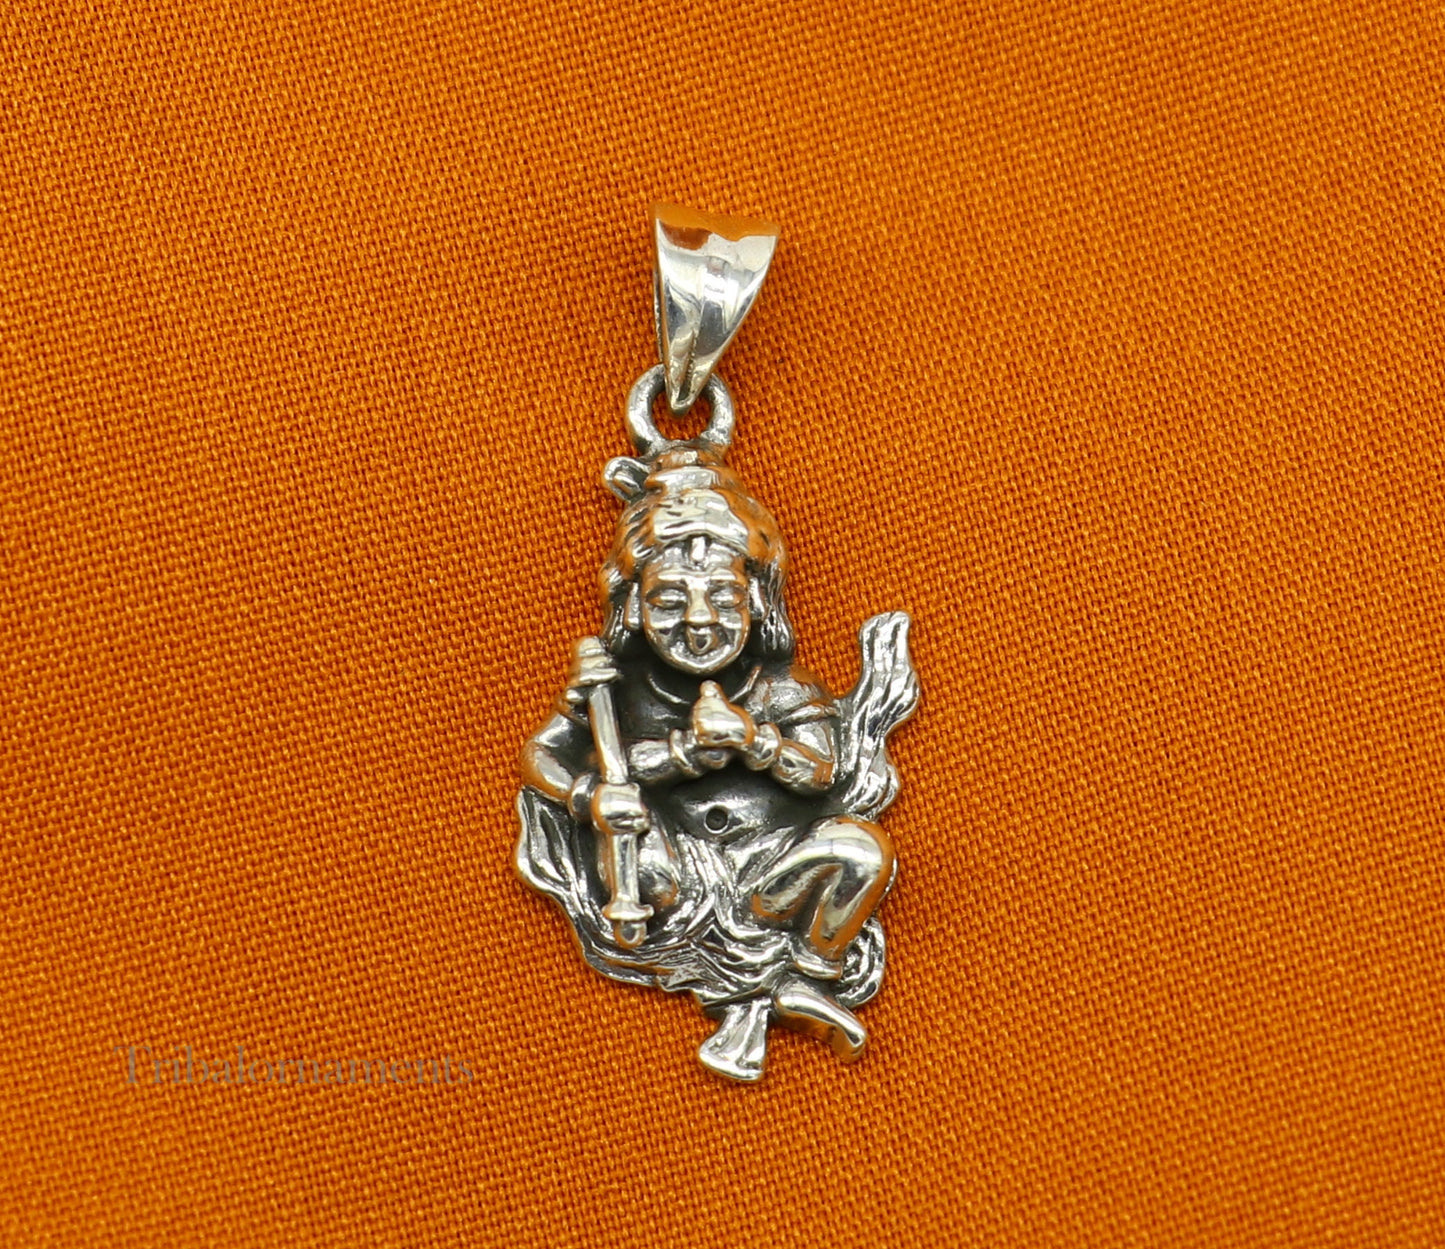 Divine lord kartikya blessing pendant, excellent vintage designer 925 sterling silver handmade jewelry from indiassp973 - TRIBAL ORNAMENTS